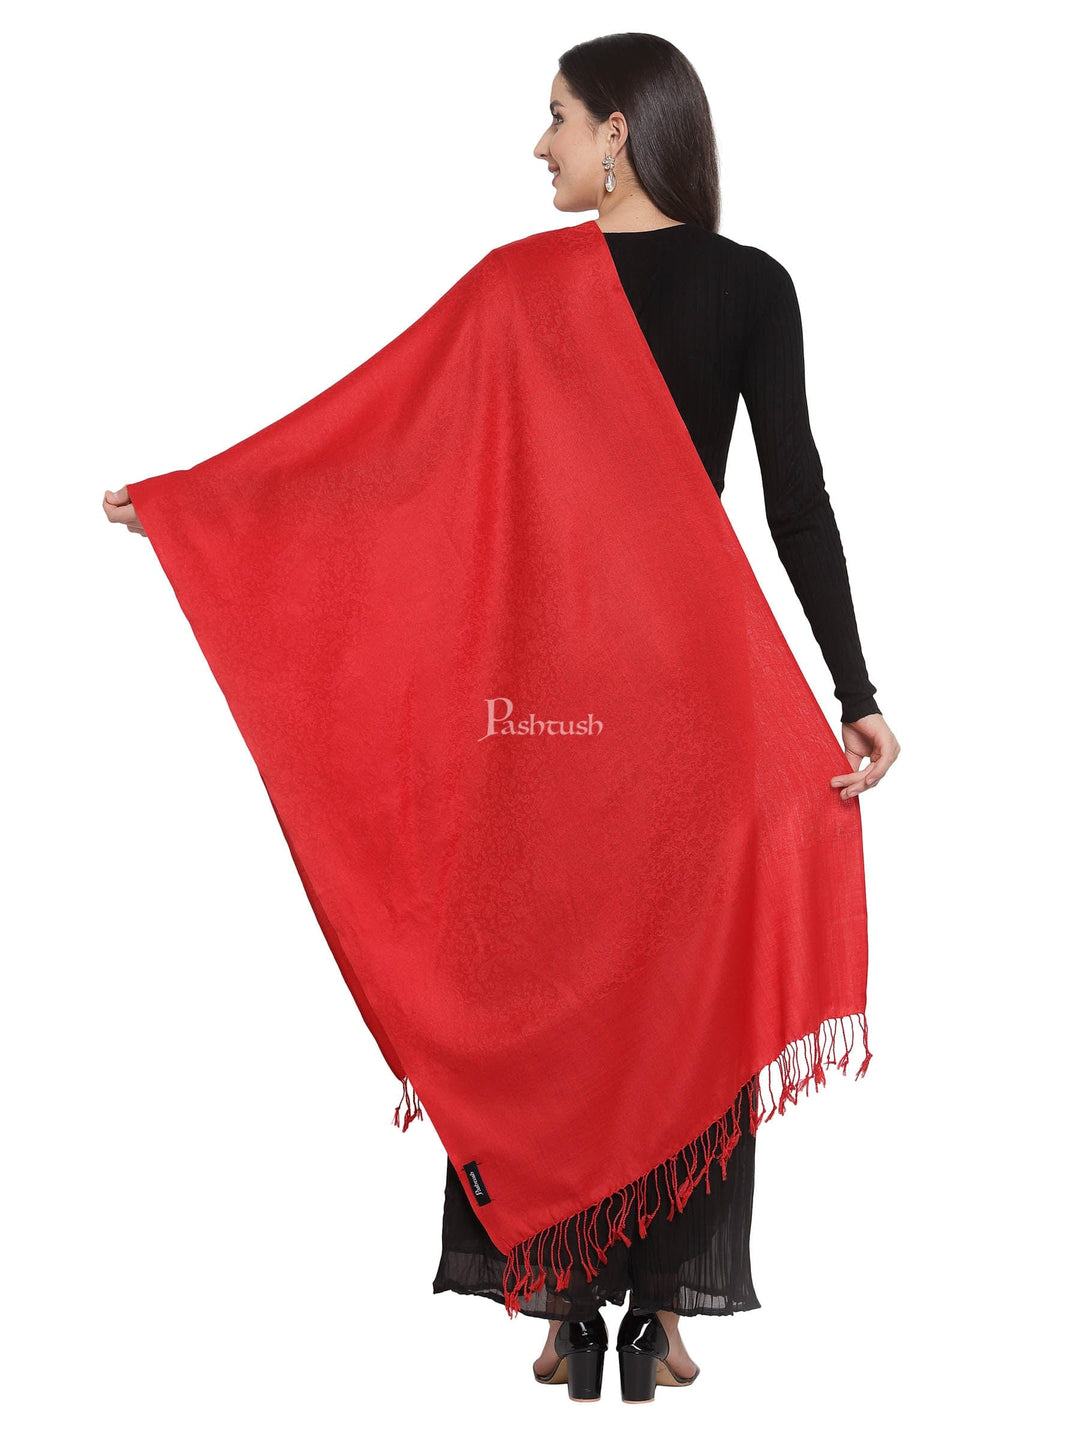 Pashtush India Gift Pack Pashtush His And Her Set Of Fine Wool Self Stoles With Premium Gift Box Packaging, Black and Scarlet Red